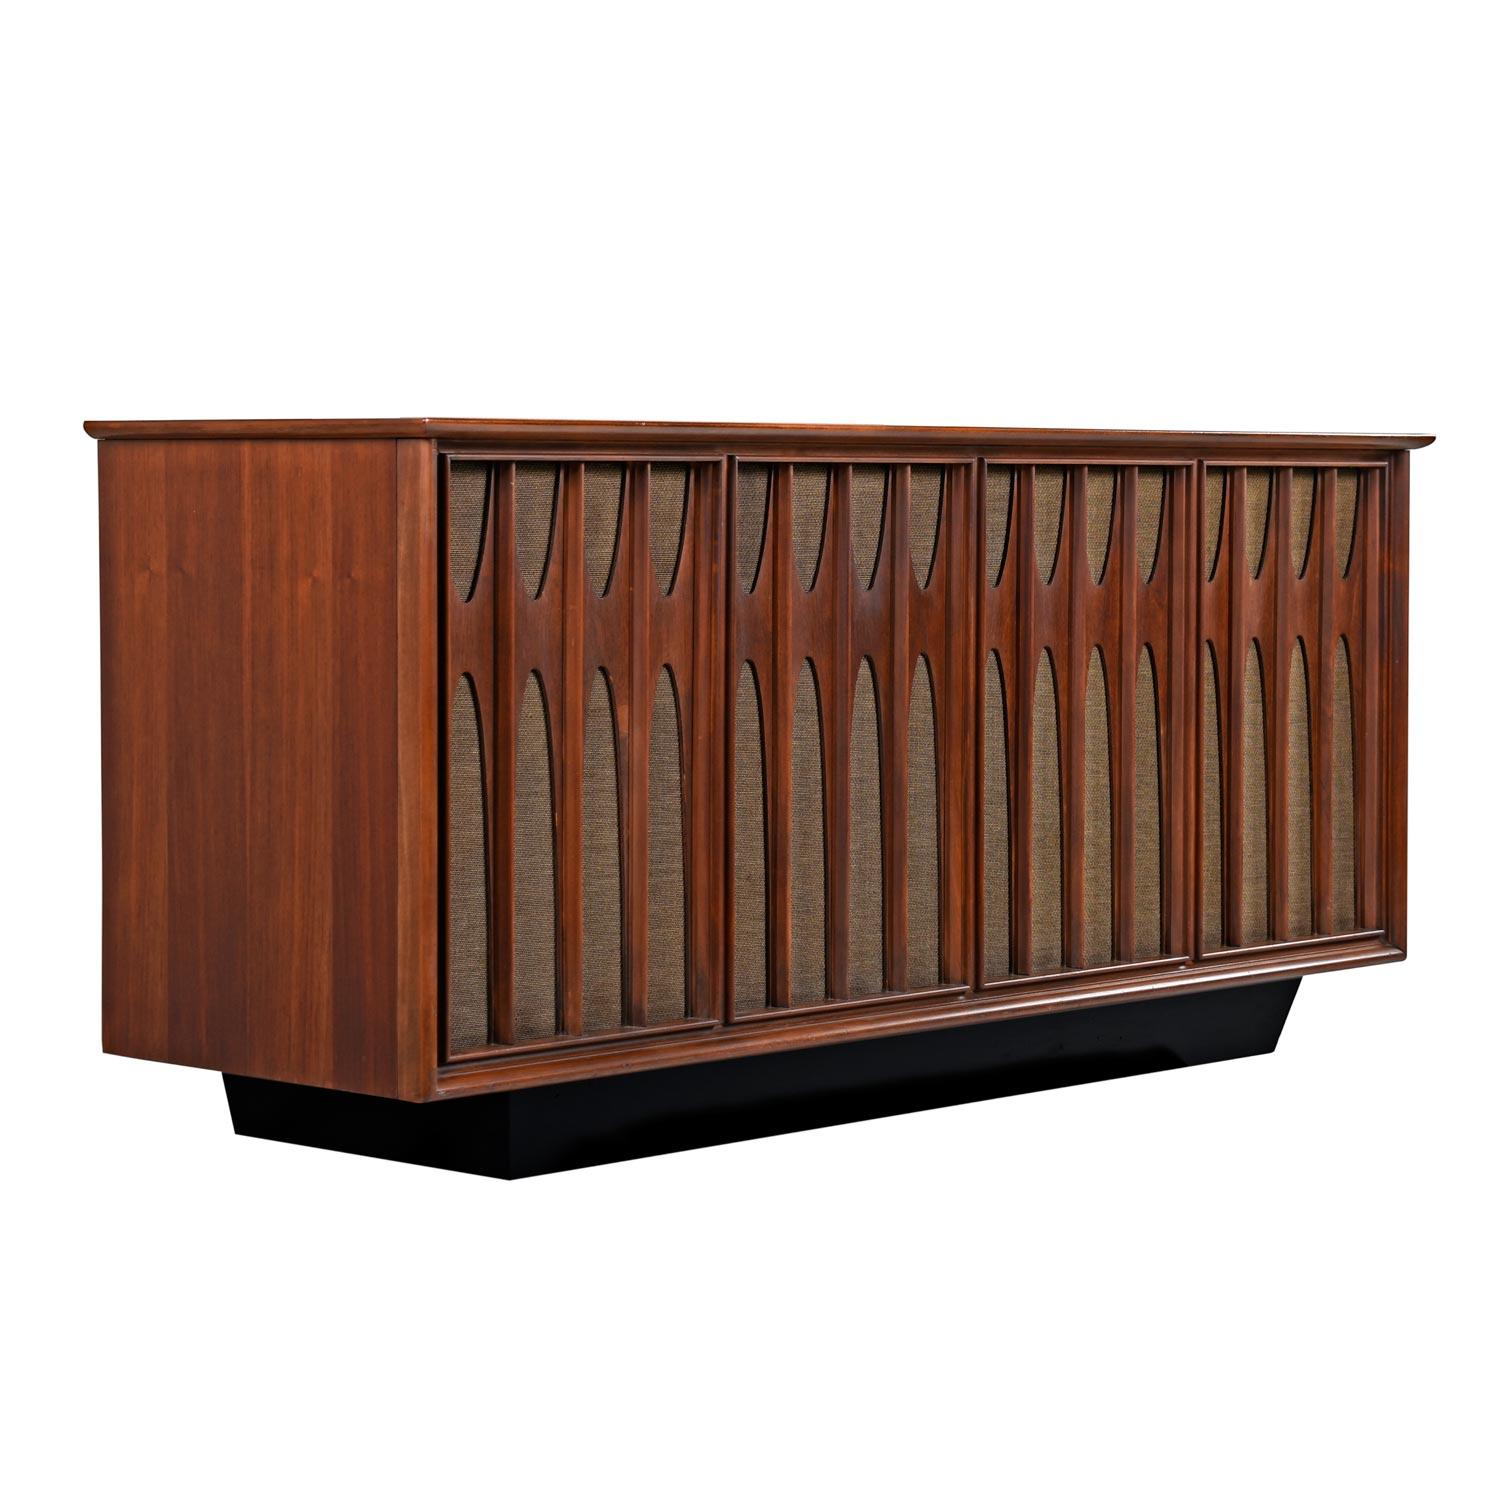 Not only does this Danish modern style cabinet look beautiful, but the combination of original components sound absolutely amazing. Audiophiles and casual listeners will both appreciate the presence and warm sounds recreated by the original